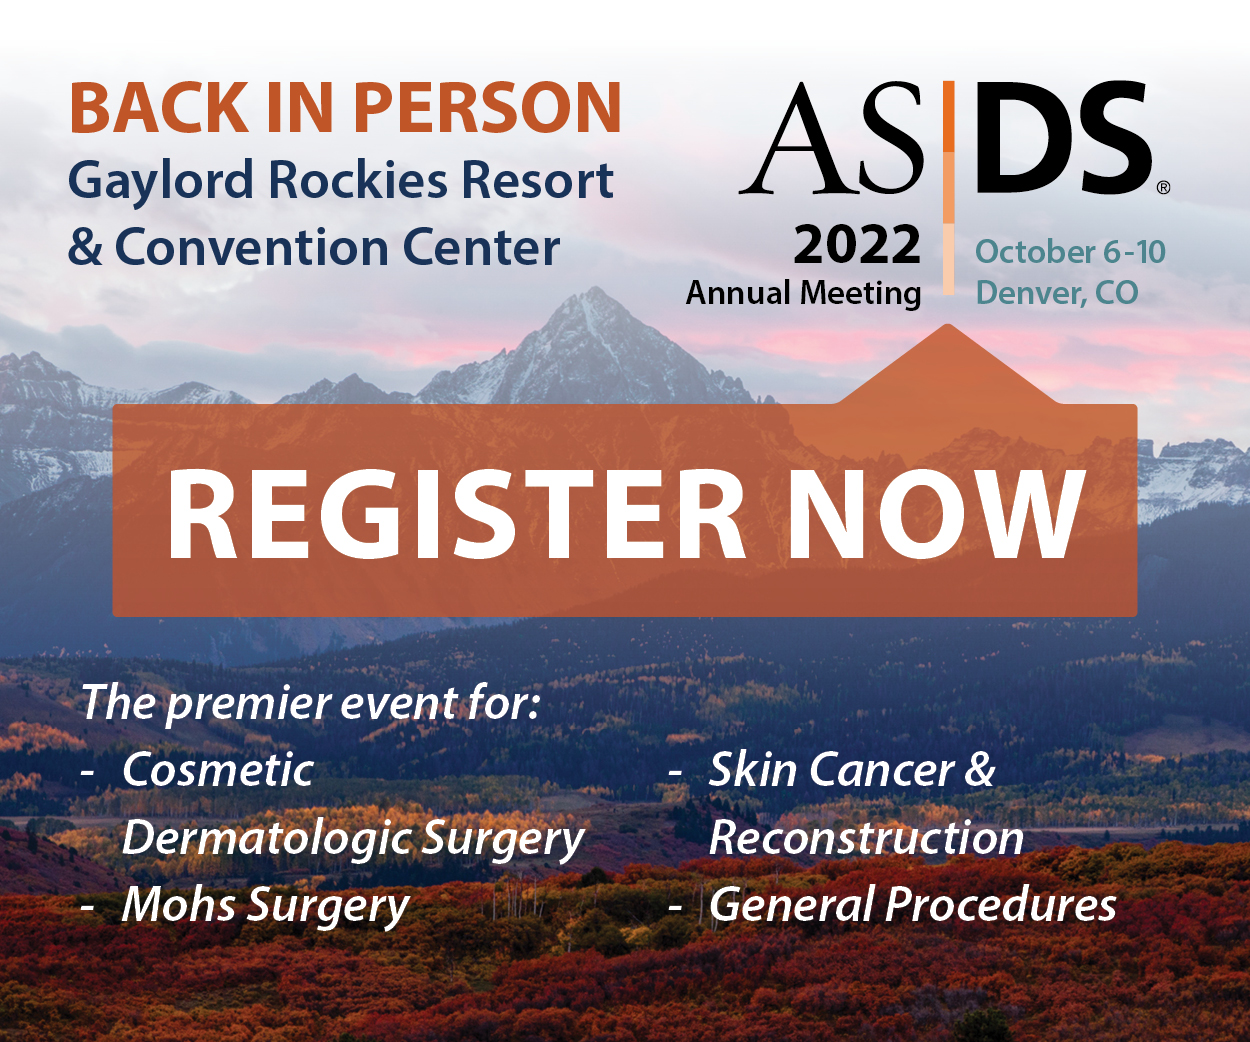 ASDS Launches Registration for its 2022 Annual Meeting